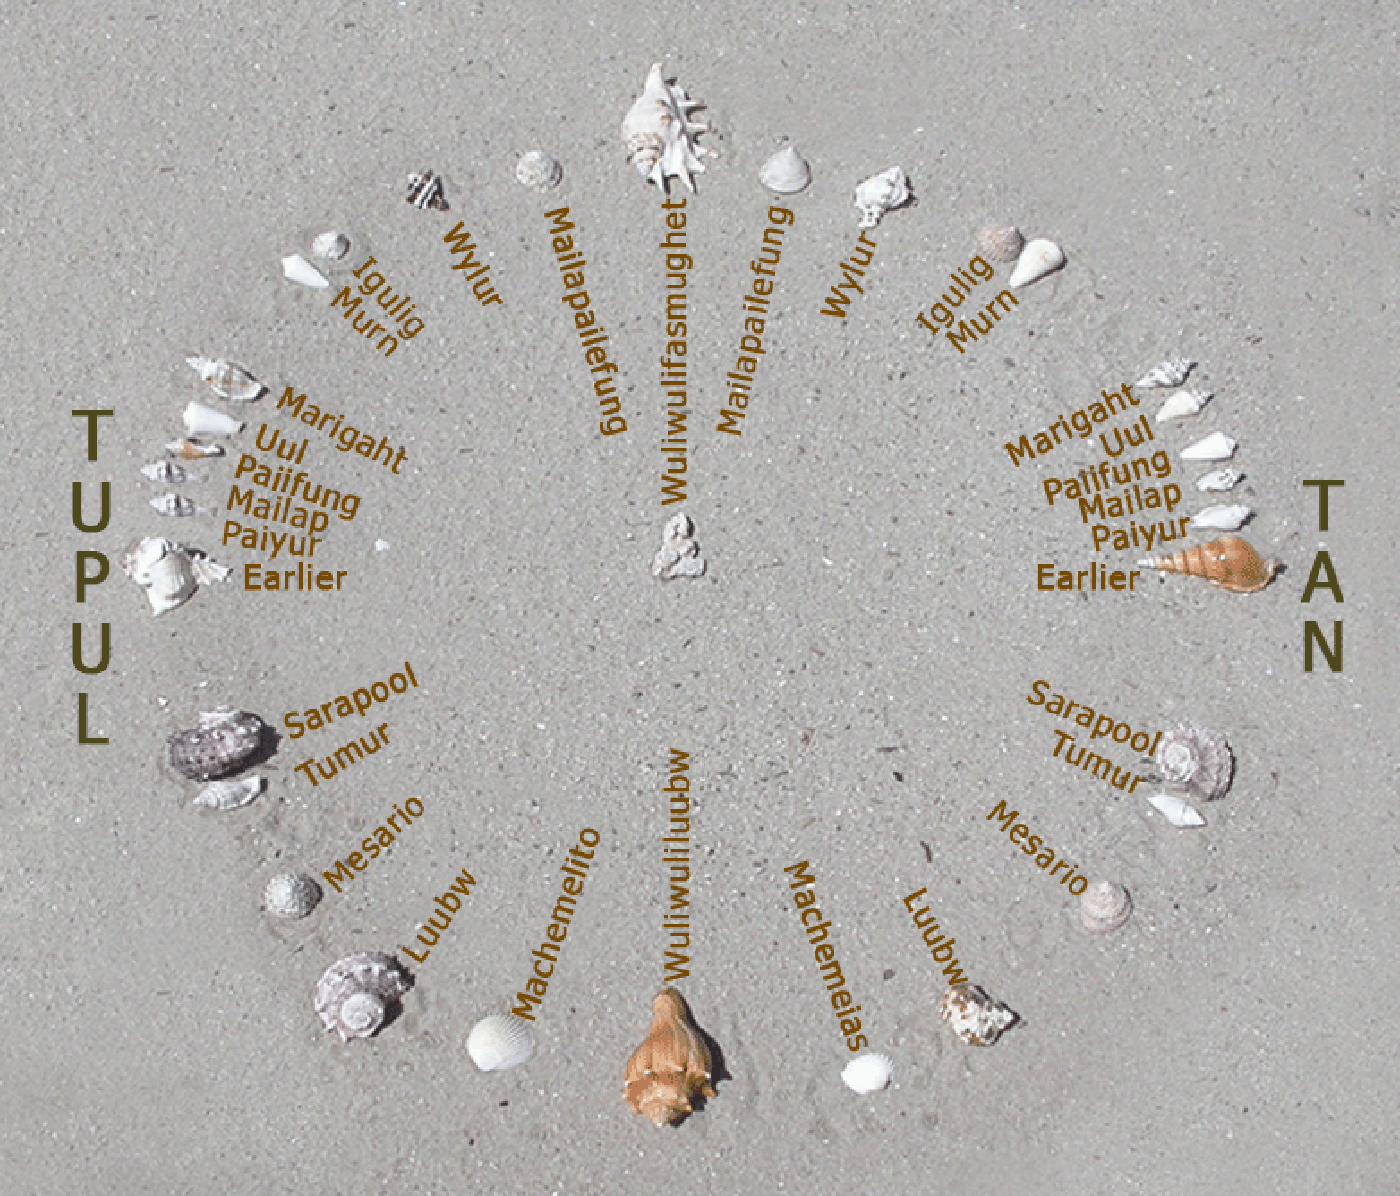 Newportm’s photo of a recreation of a Mau Piailug star-compass depicted with shells on sand, with Satawalese (See Trukic languages) text labels, as described by the Polynesian Voyaging Society, via Wikimedia Commons.